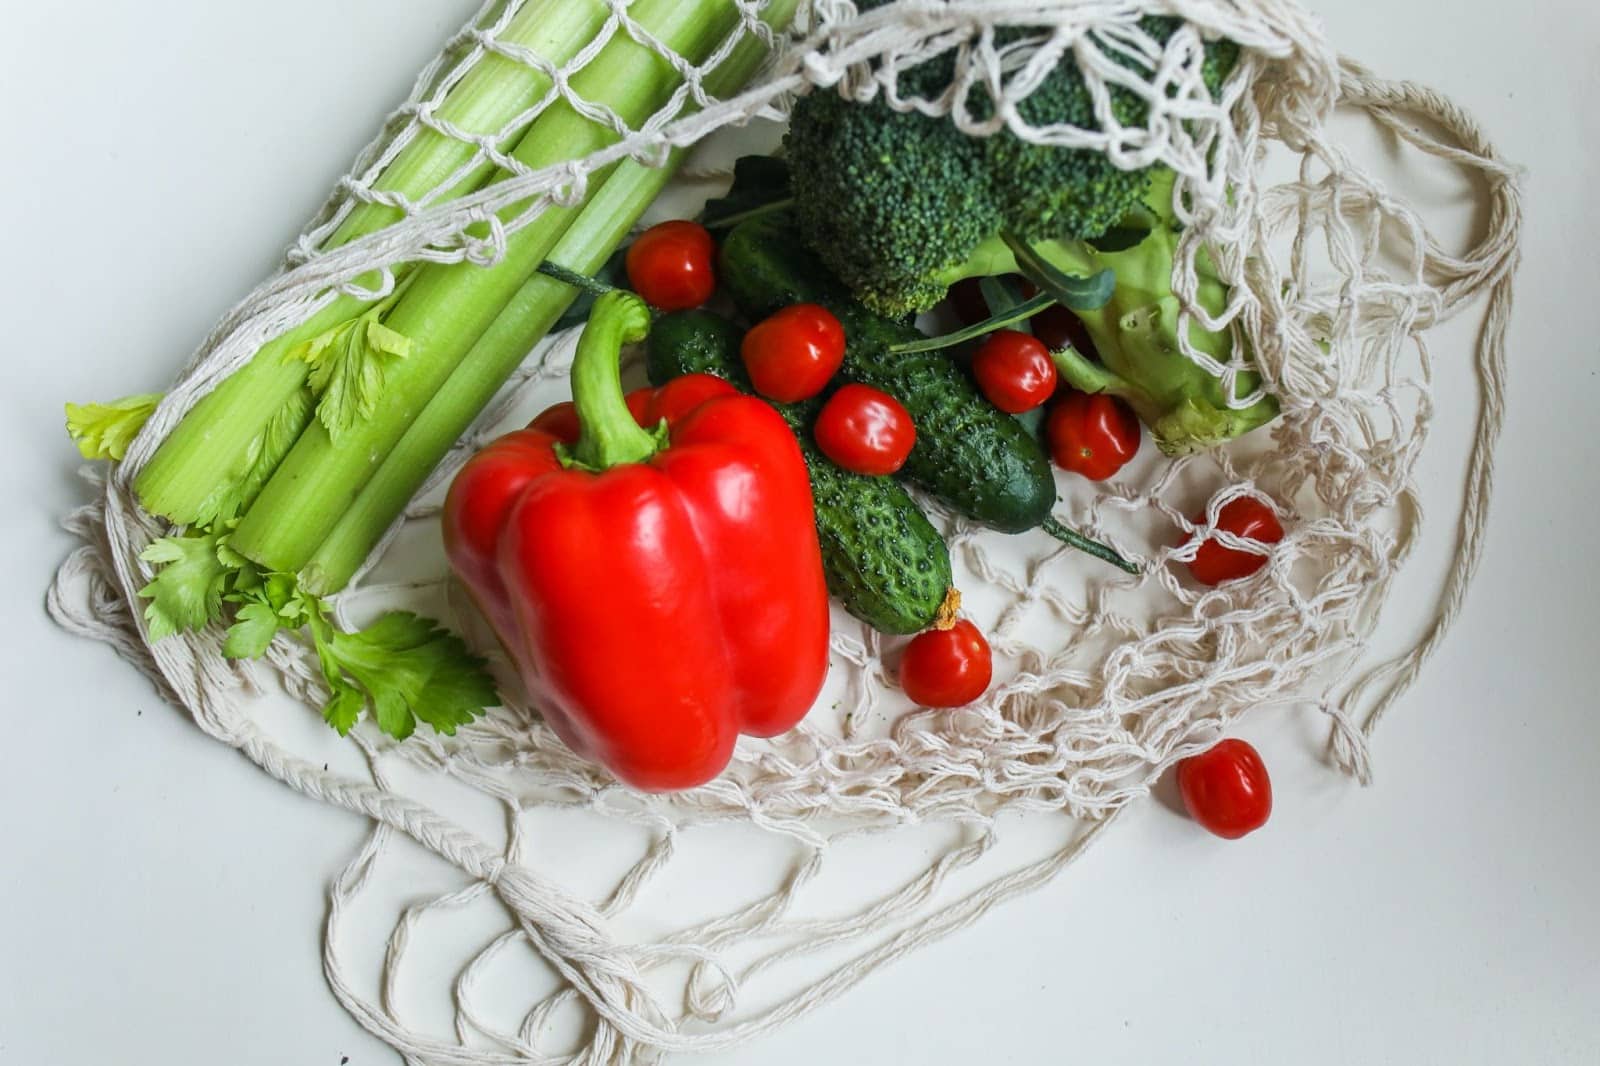 Vegetables in a shopping bag